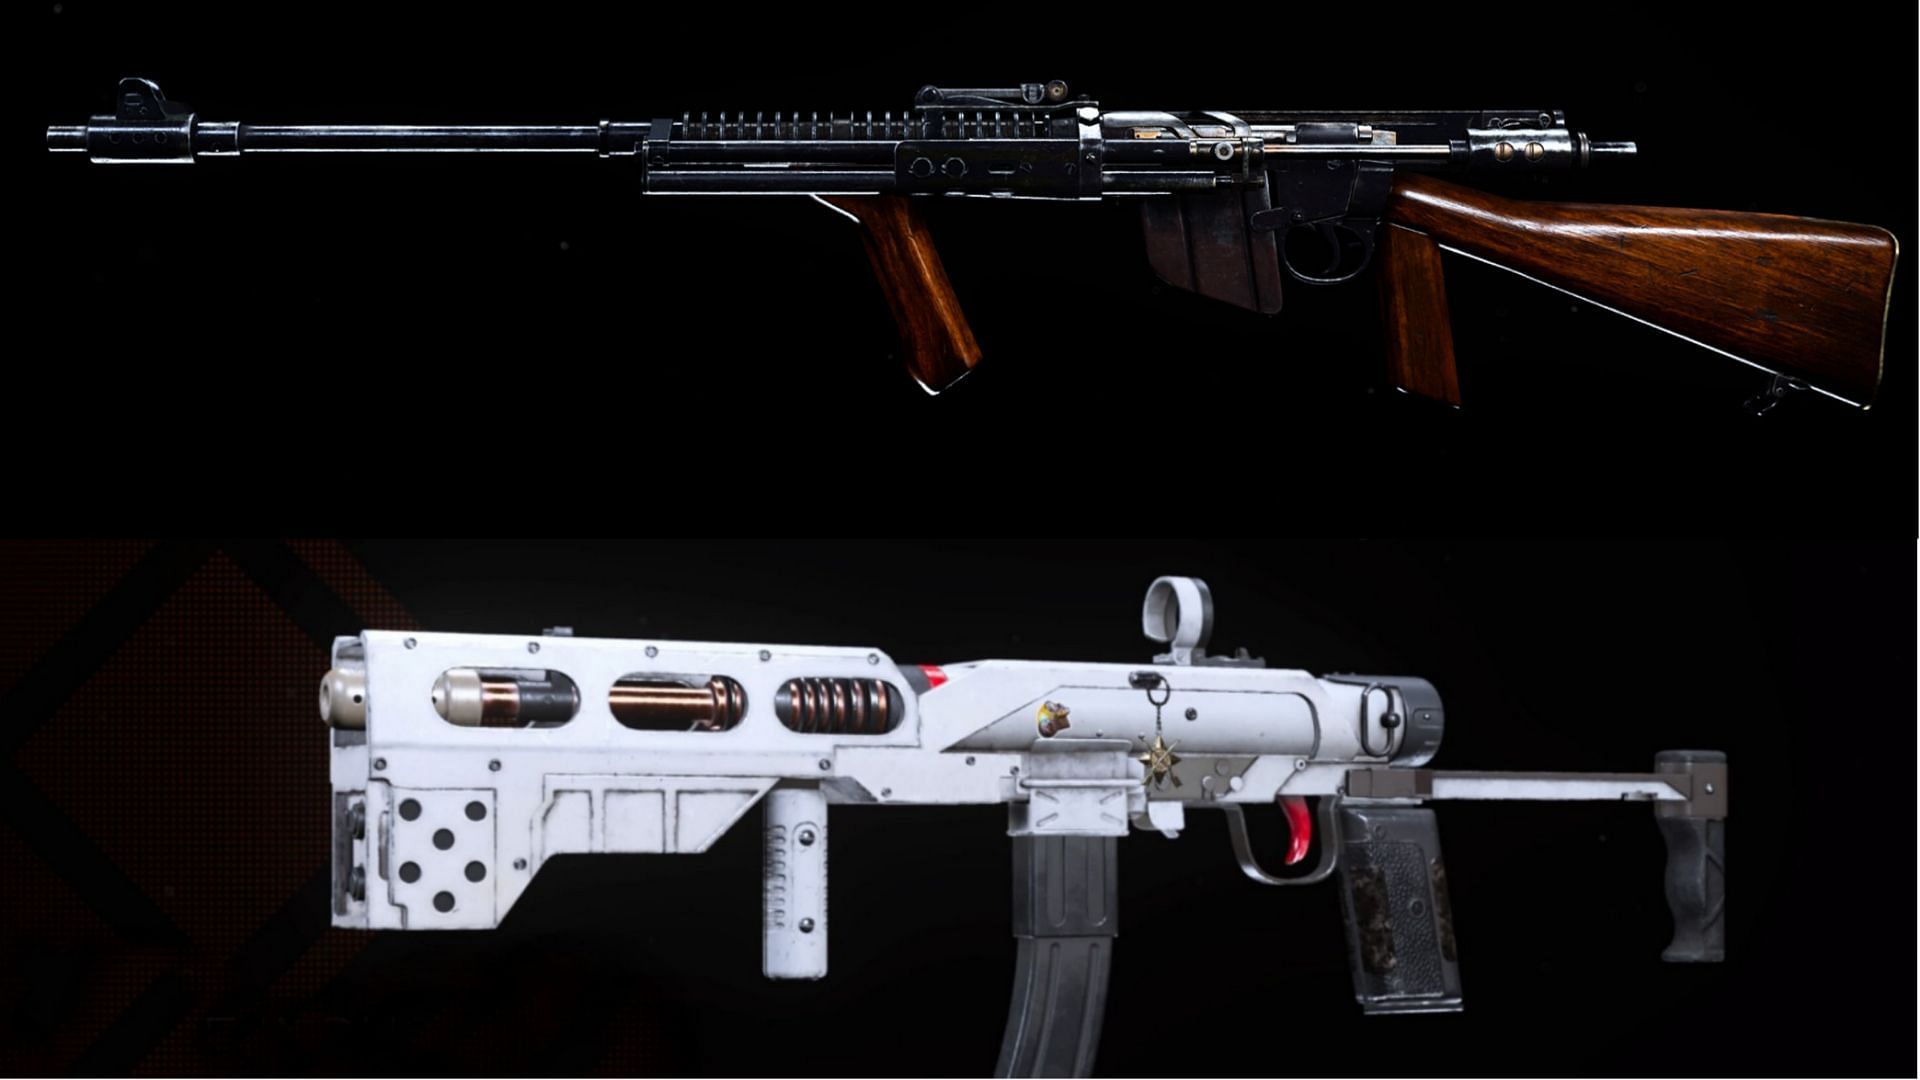 The NZ-41 (top) and H4 Blixen SMG (bottom) in Call of Duty Warzone (Image via Activision)